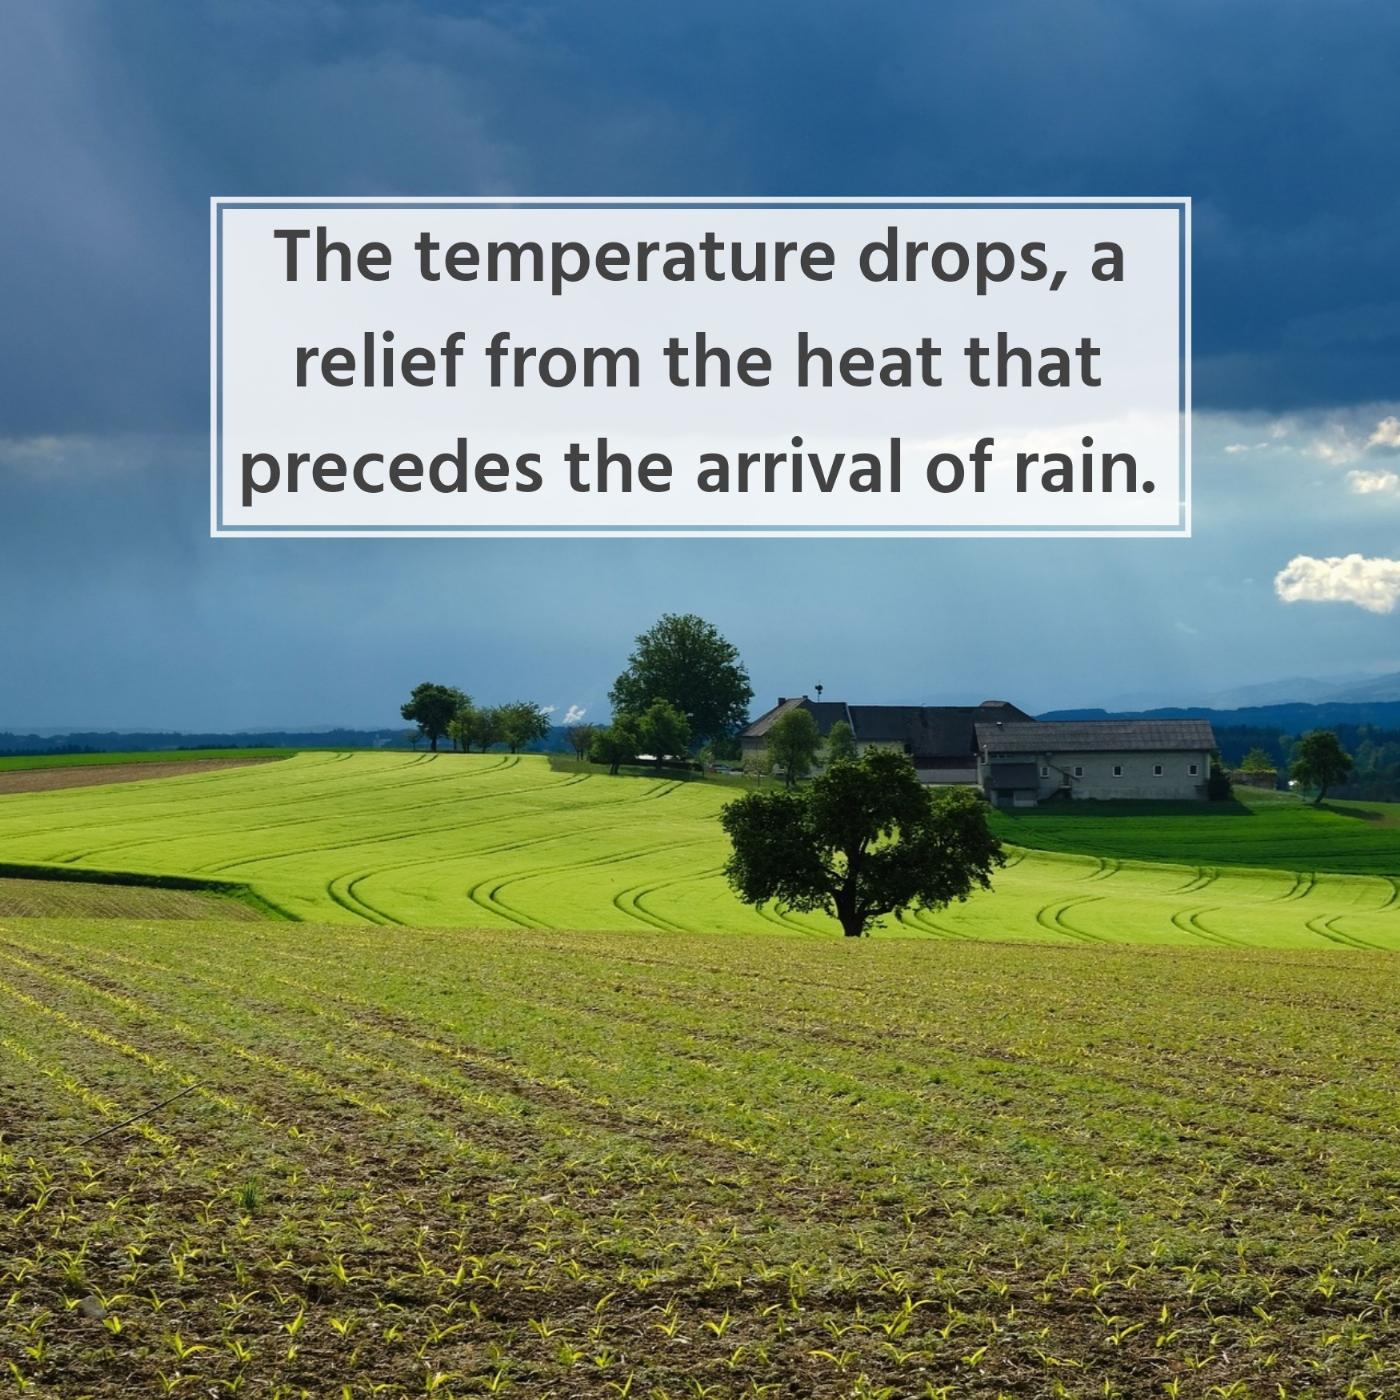 The temperature drops a relief from the heat that precedes the arrival of rain